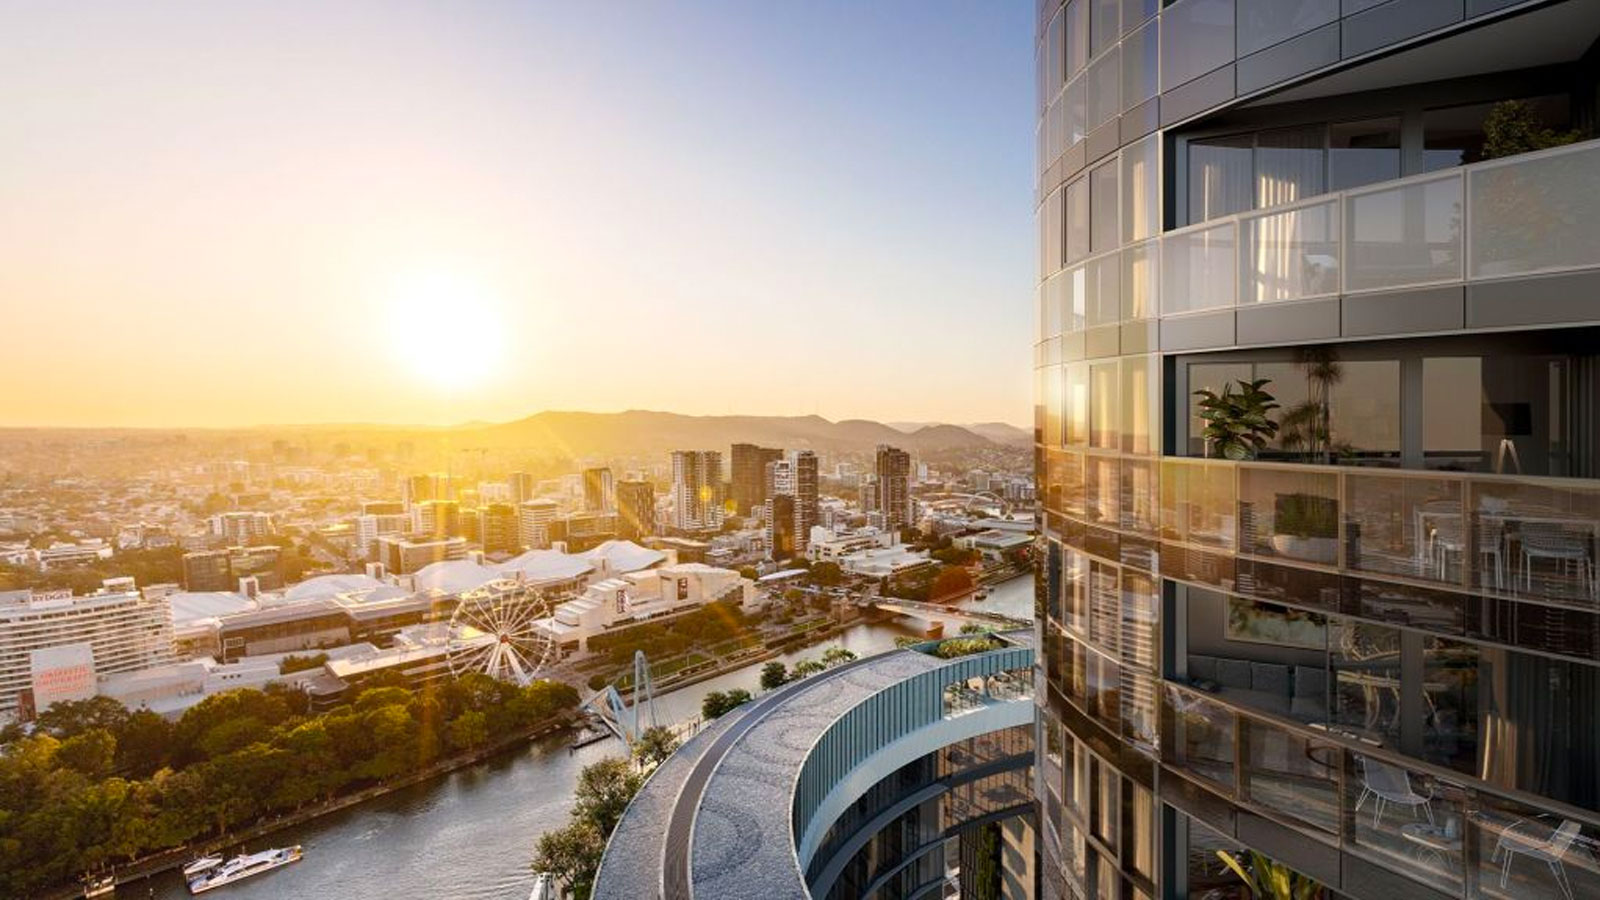 An artist's impression of new work at the Brisbane River edge of the $3.6 billion Queen's Wharf development.residential project in Queensland